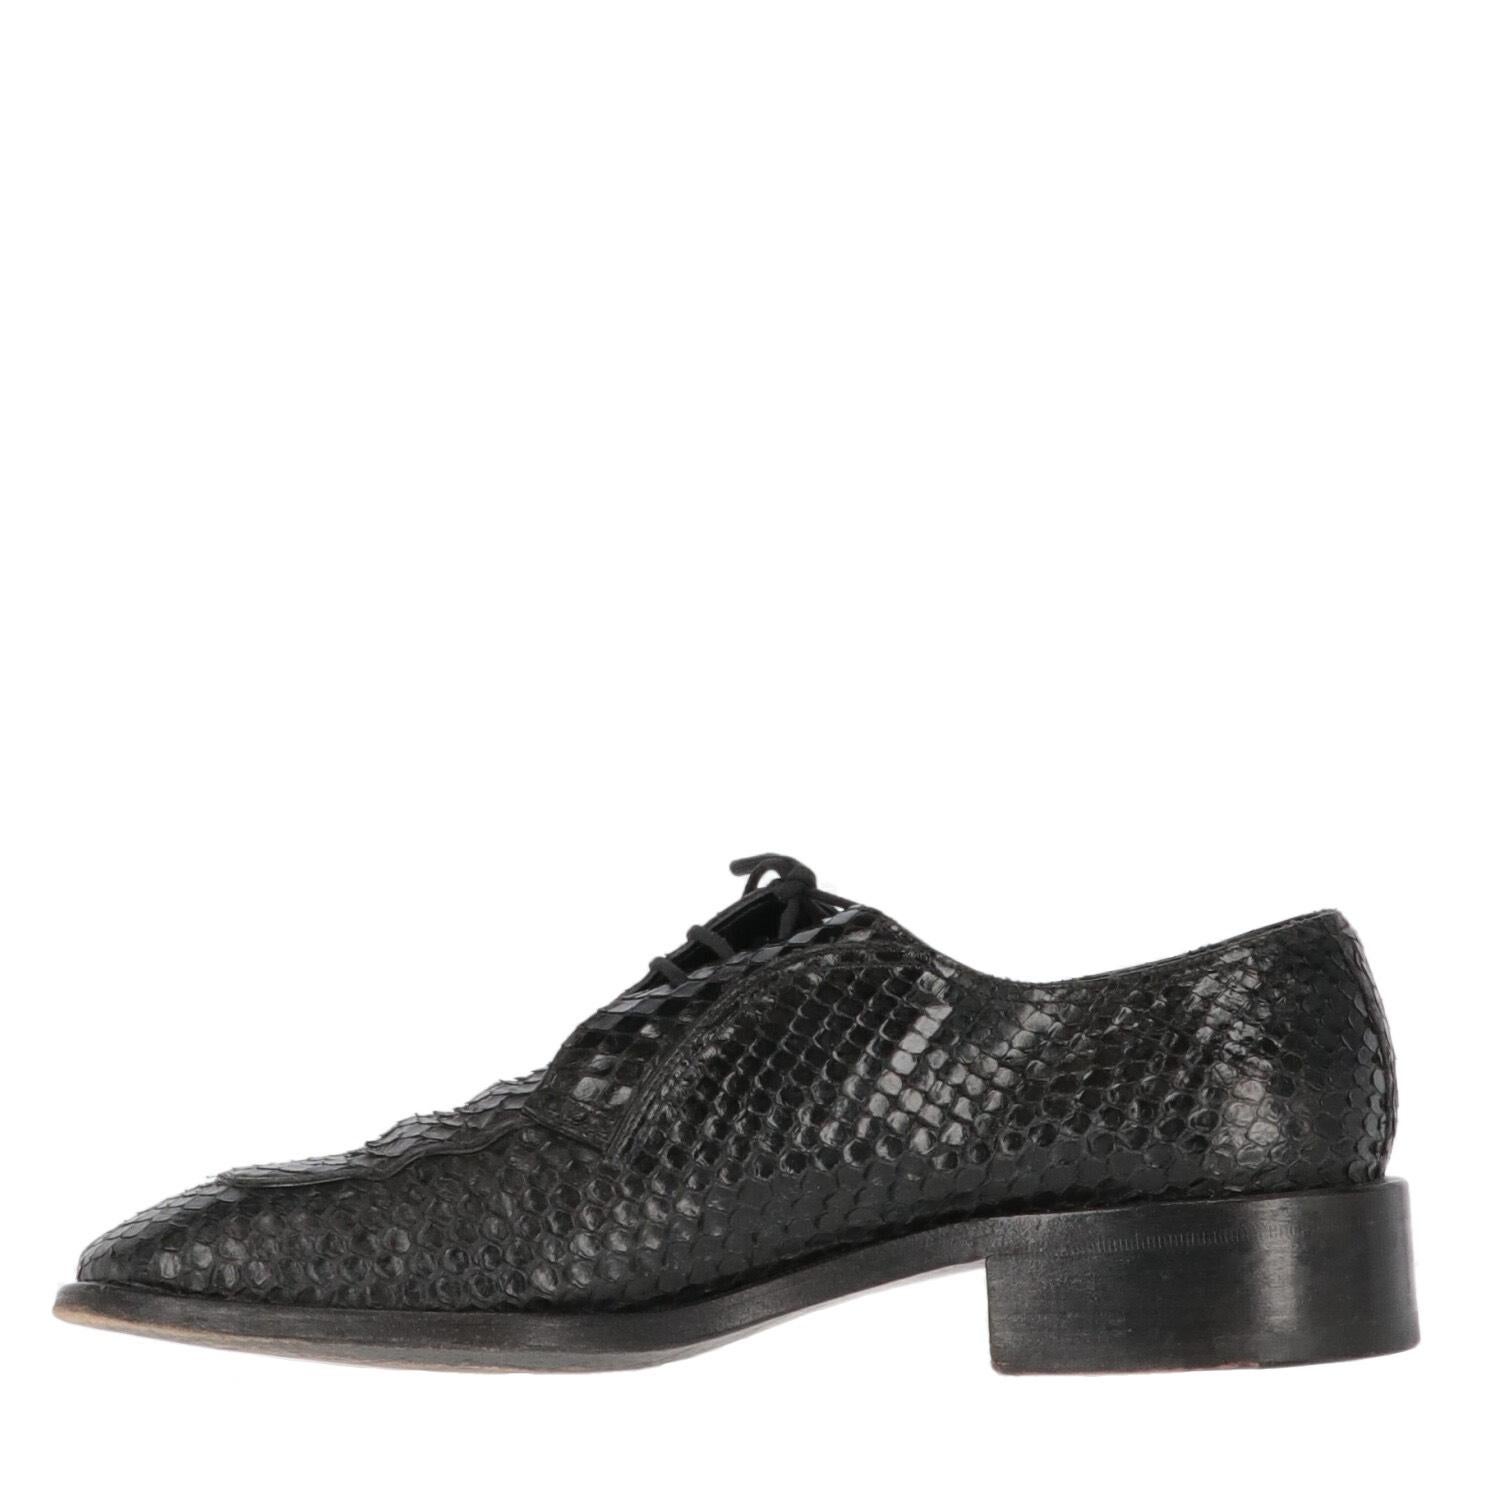 A.N.G.E.L.O. Vintage - ITALY
Cesare Paciotti black python leather classic lace-up shoe with tone-on-tone laces, stitching on the tip and square toe.

The item shows scratches and some wrinkles on the leather, as shown in the pictures.

Please note